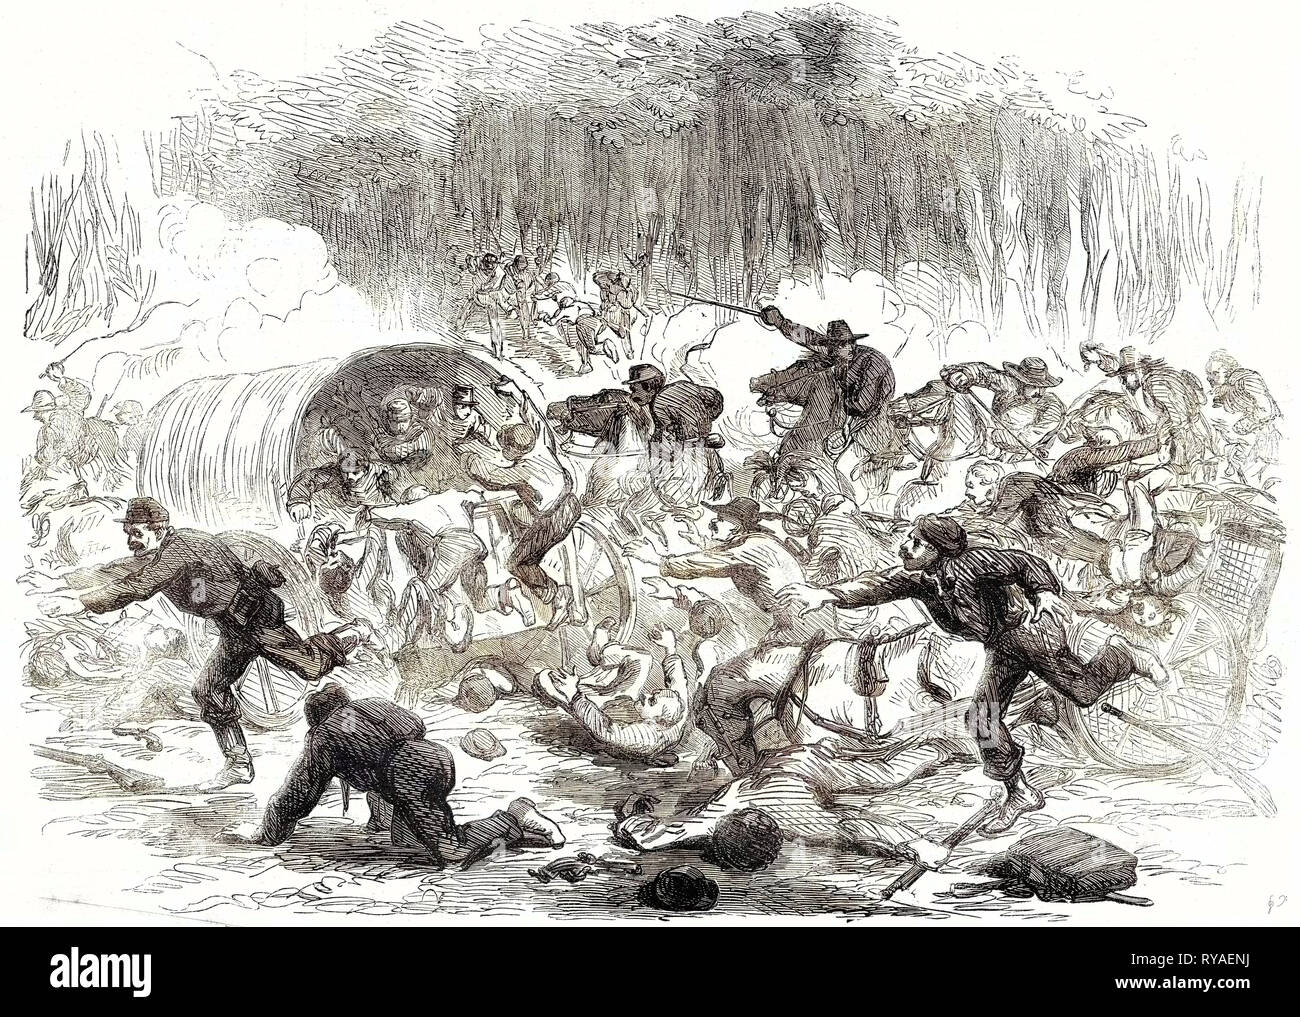 The Civil War in America: The Stampede from Bull Run 17 August 1861 Stock Photo